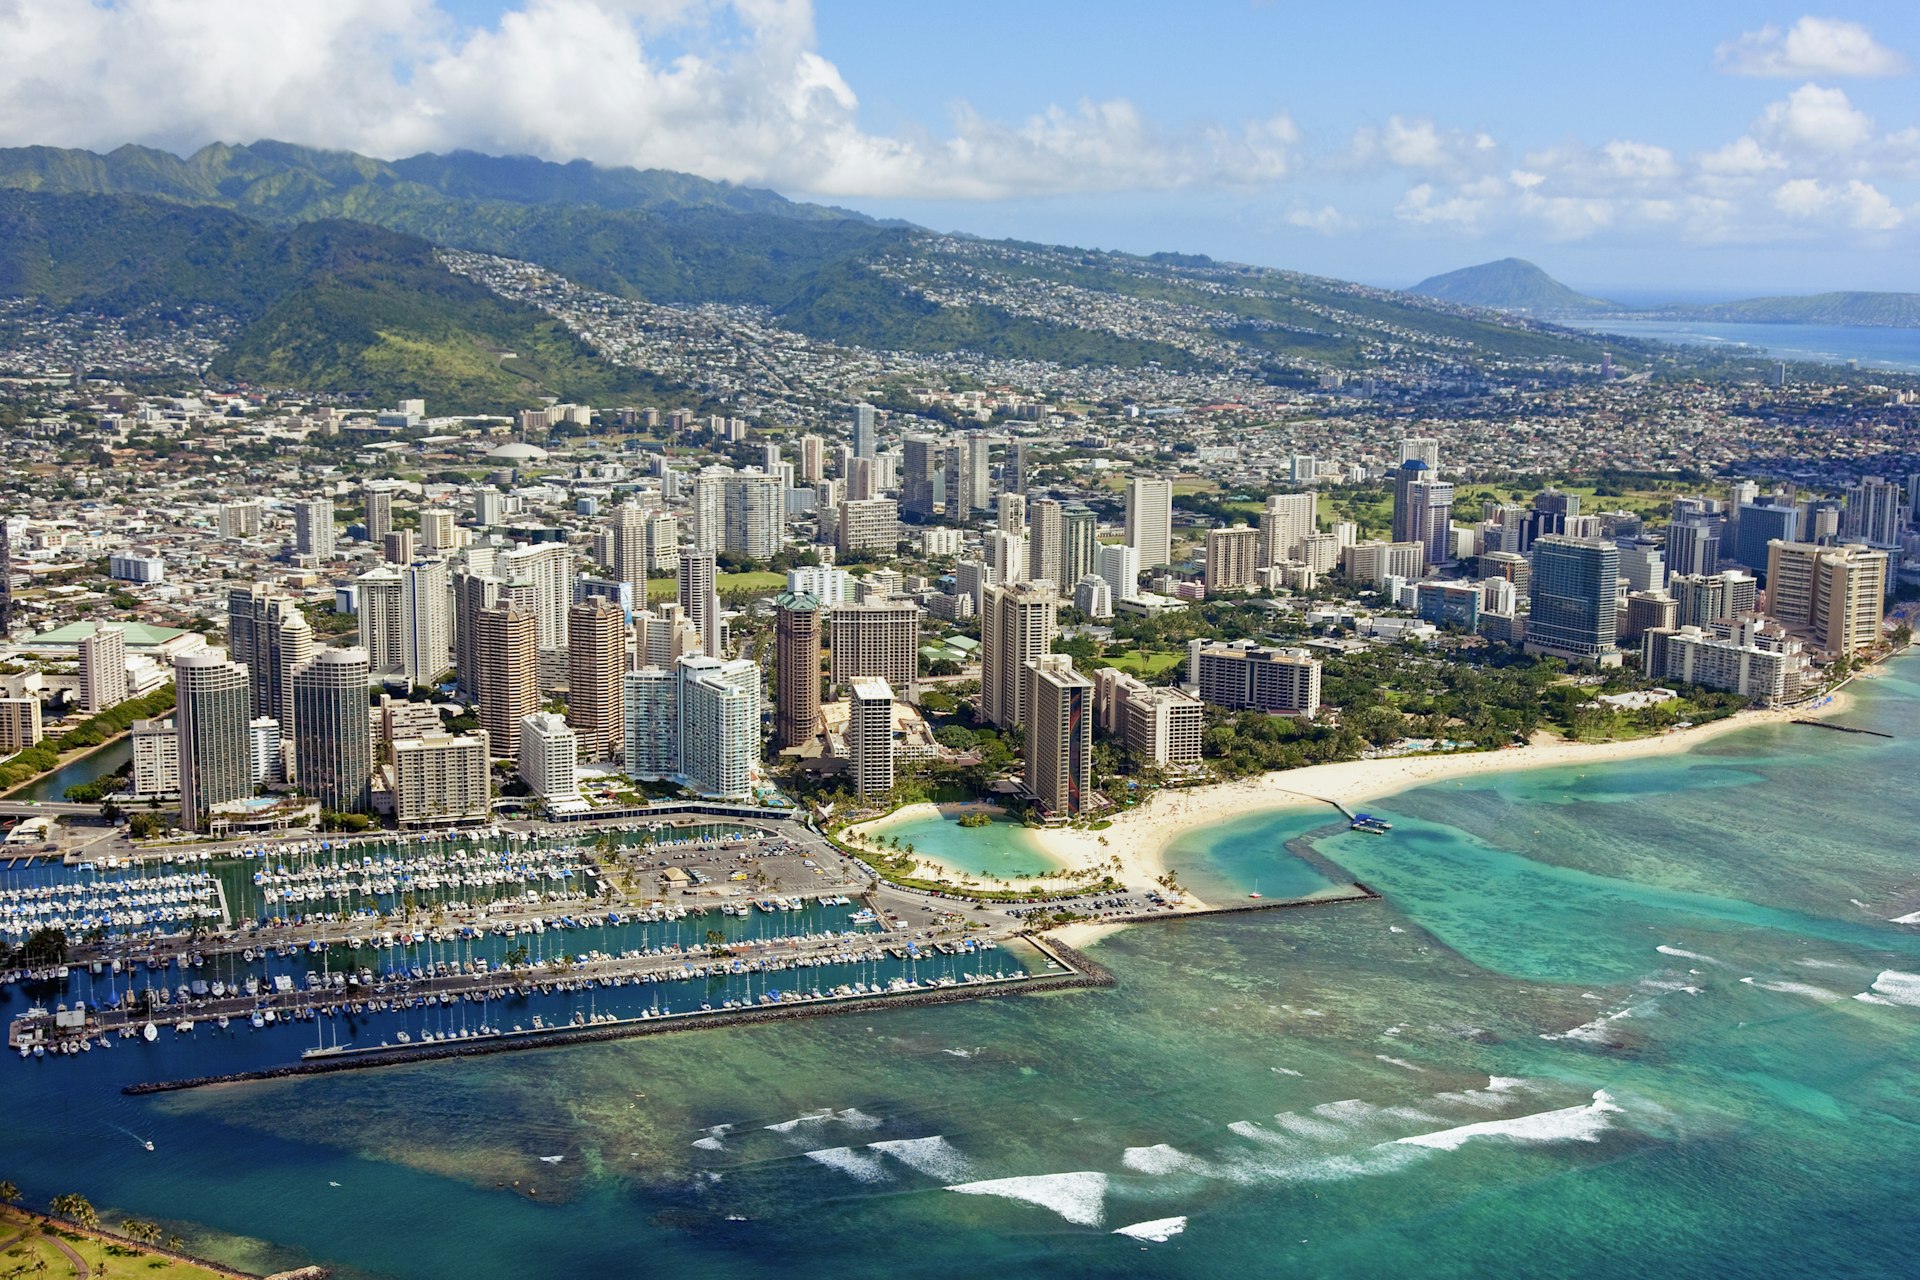 A large seaside city with tall buildings and greenery-covered volcanic hills rising behind